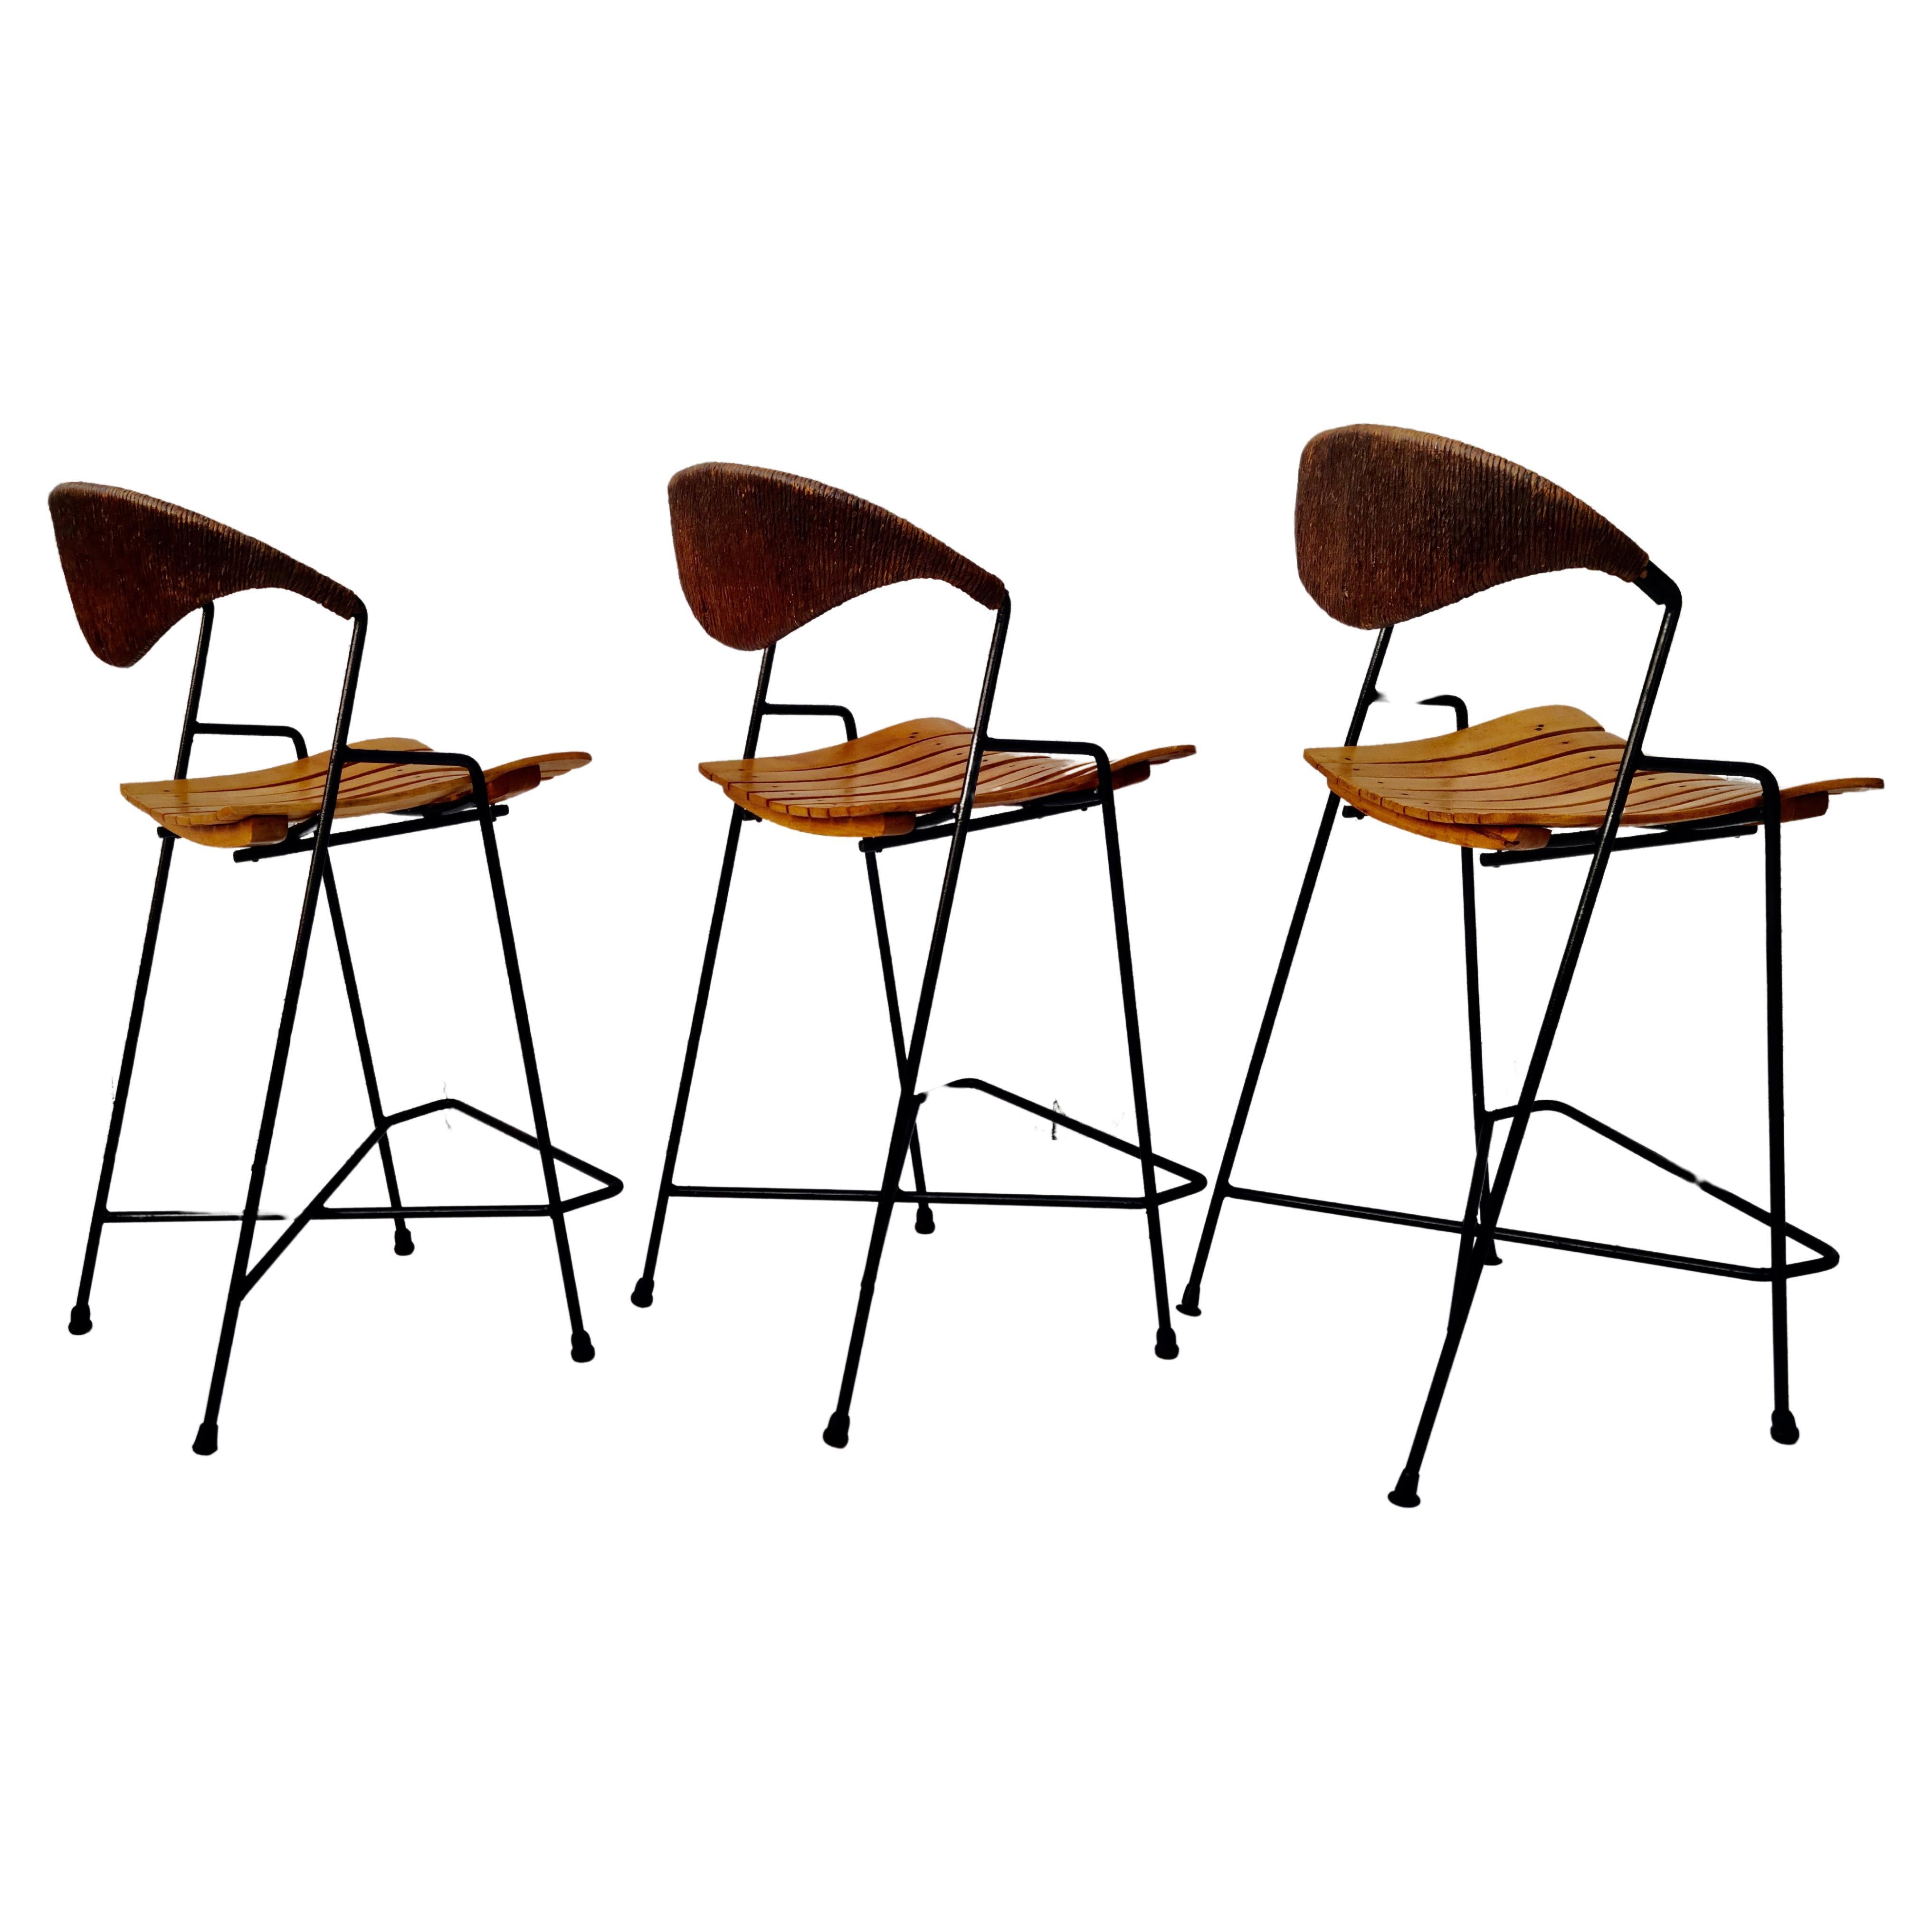 Set of 3 Barstools by Arthur Umanoff for Raymor For Sale 5